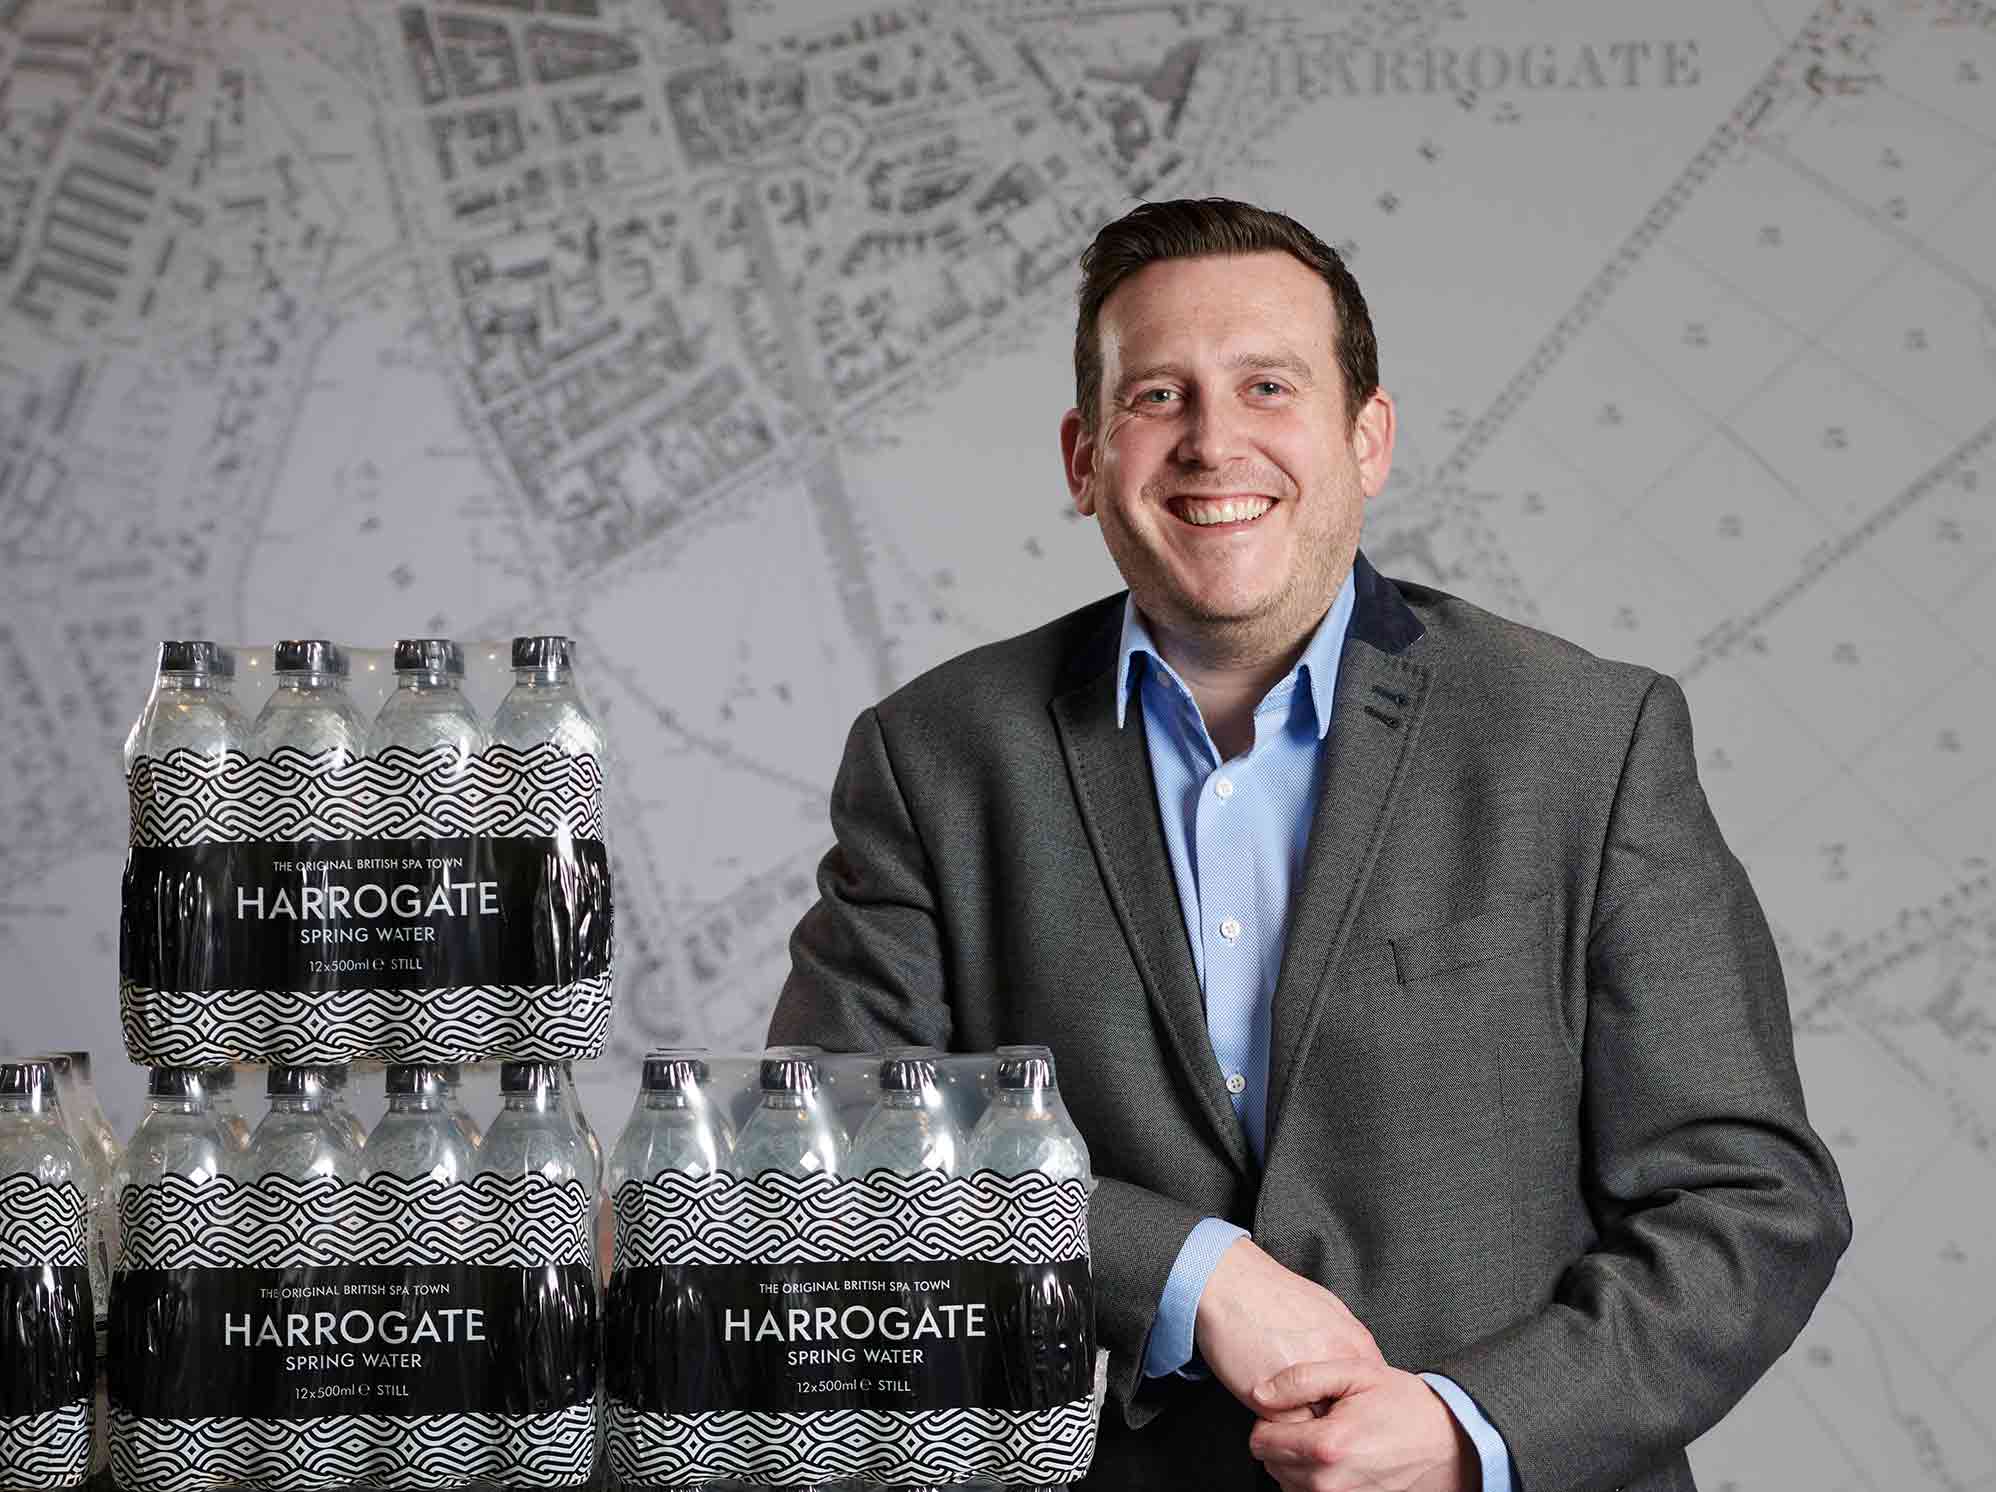 Greg Hatton, Export and Business Development Manager at Harrogate Spring Water